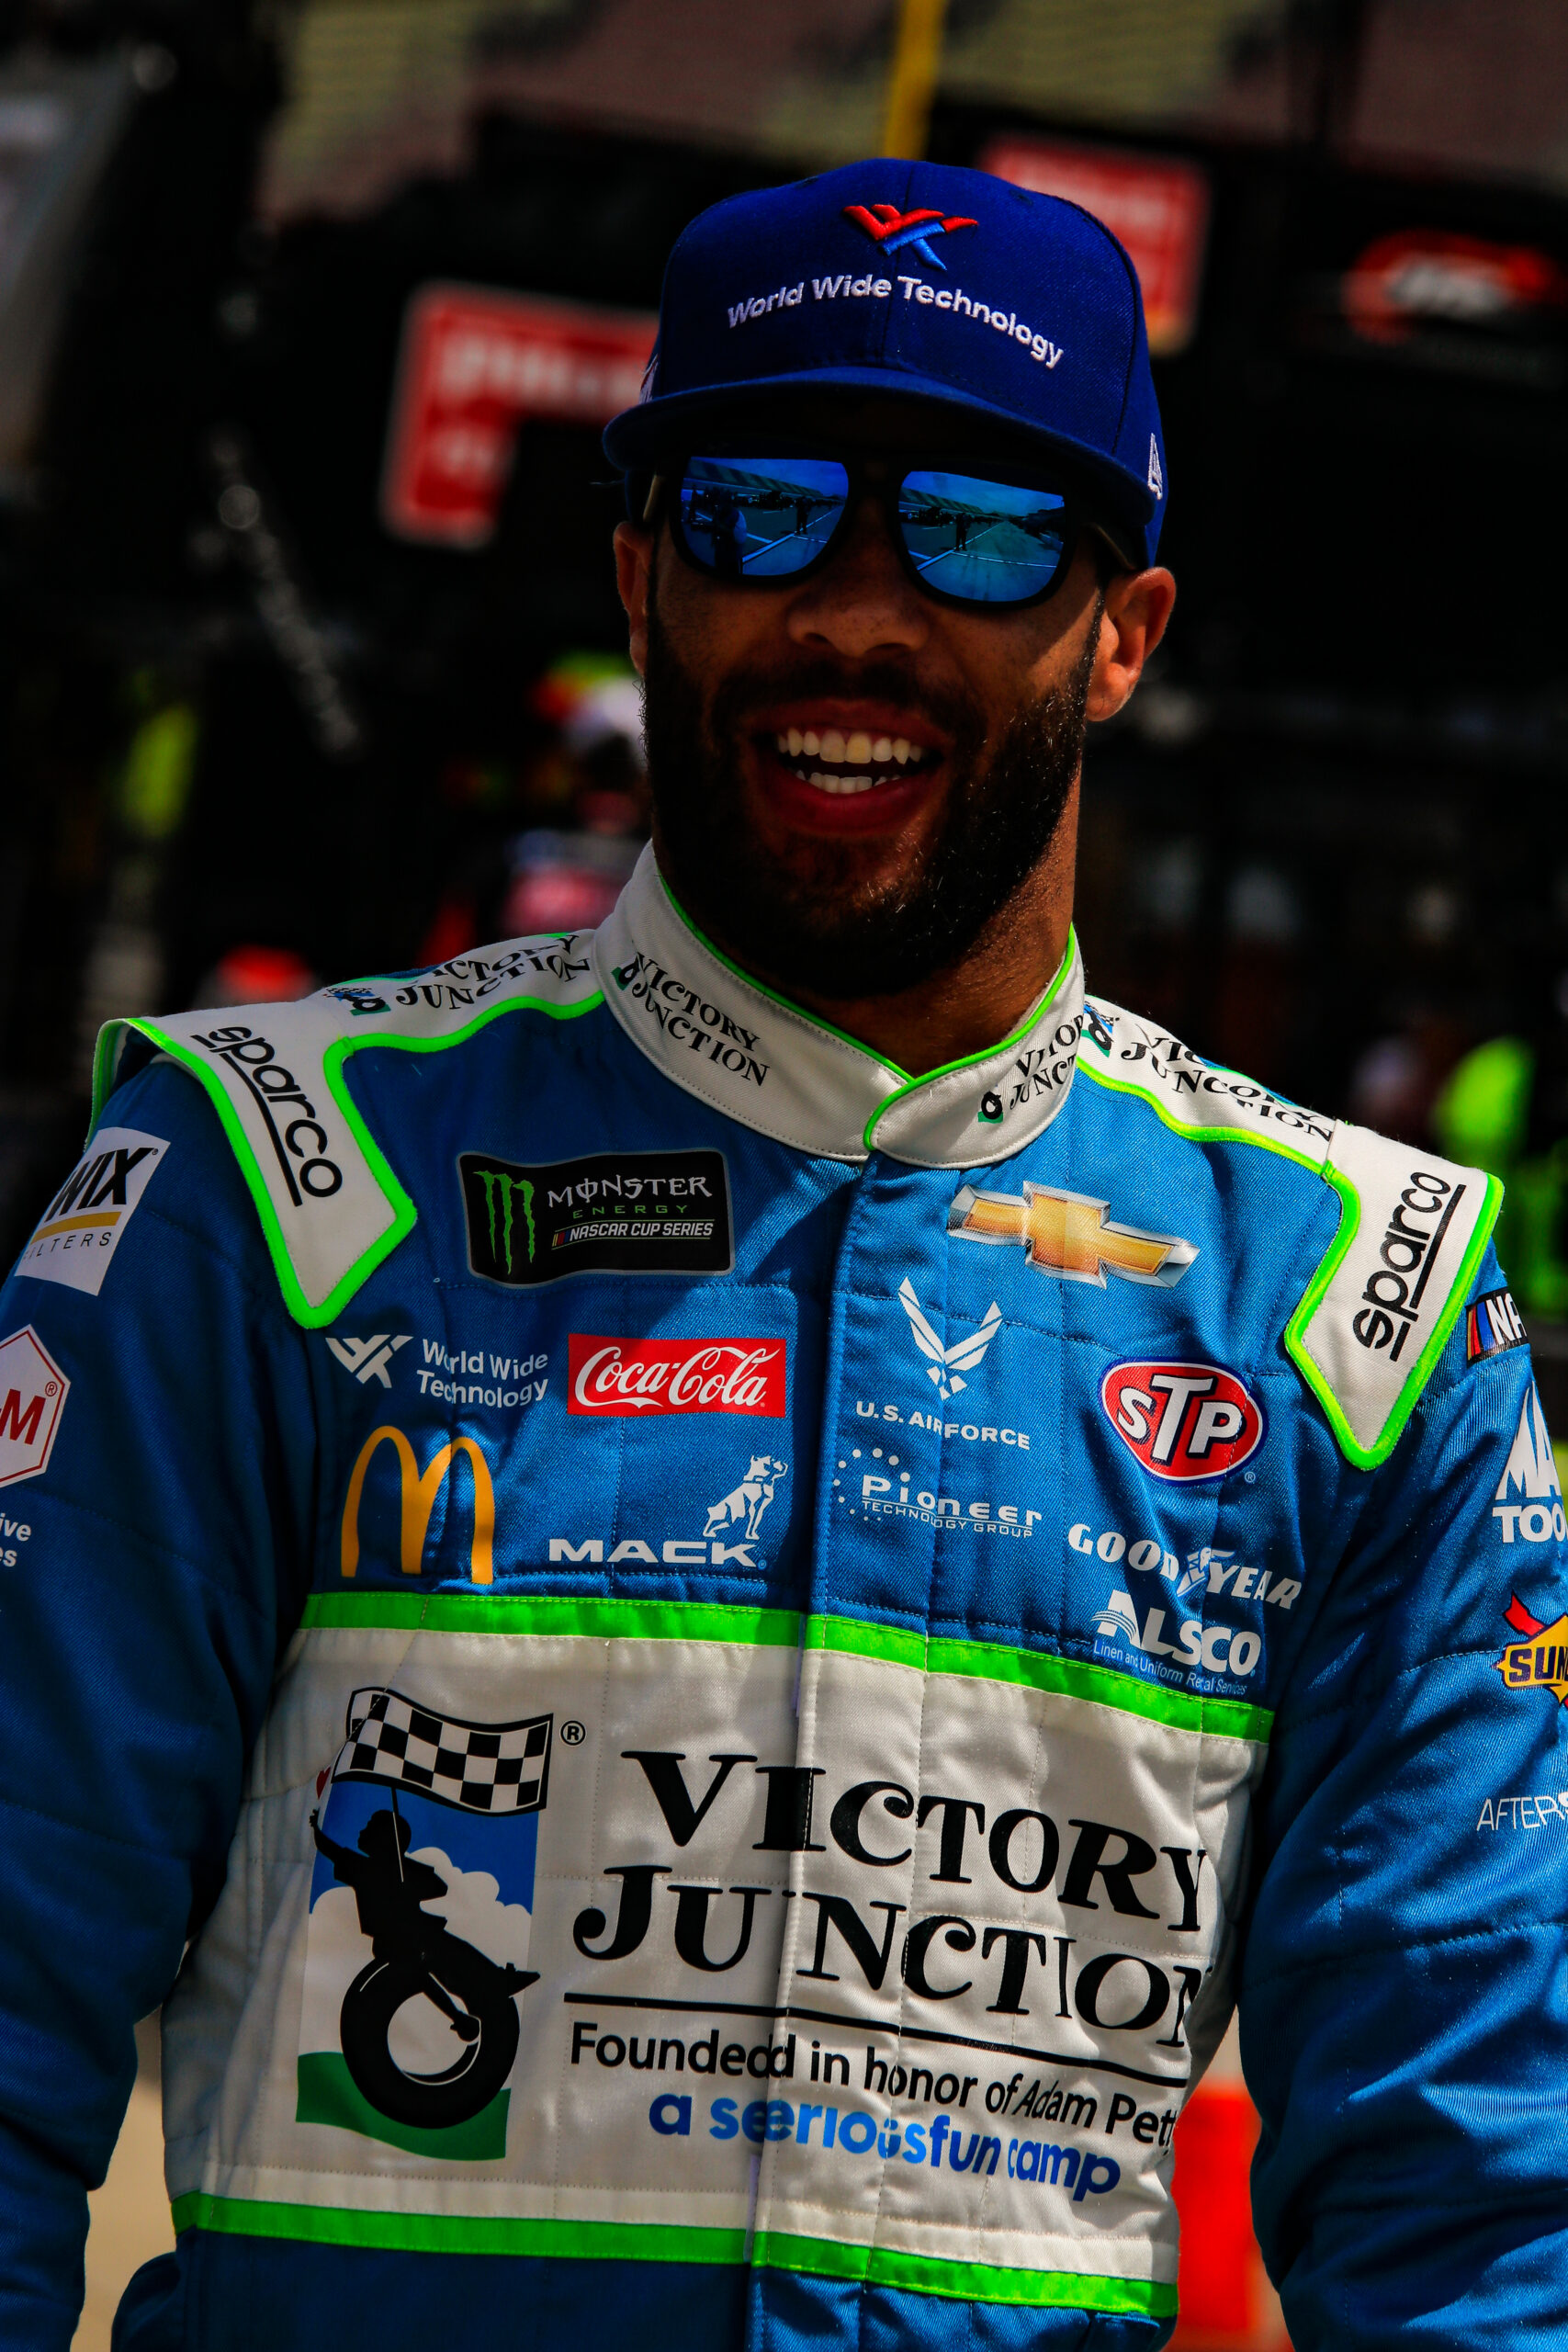 Certainly, Bubba Wallace's future seems quite bright. (Photo Credit: Stephen Conley/TPF)